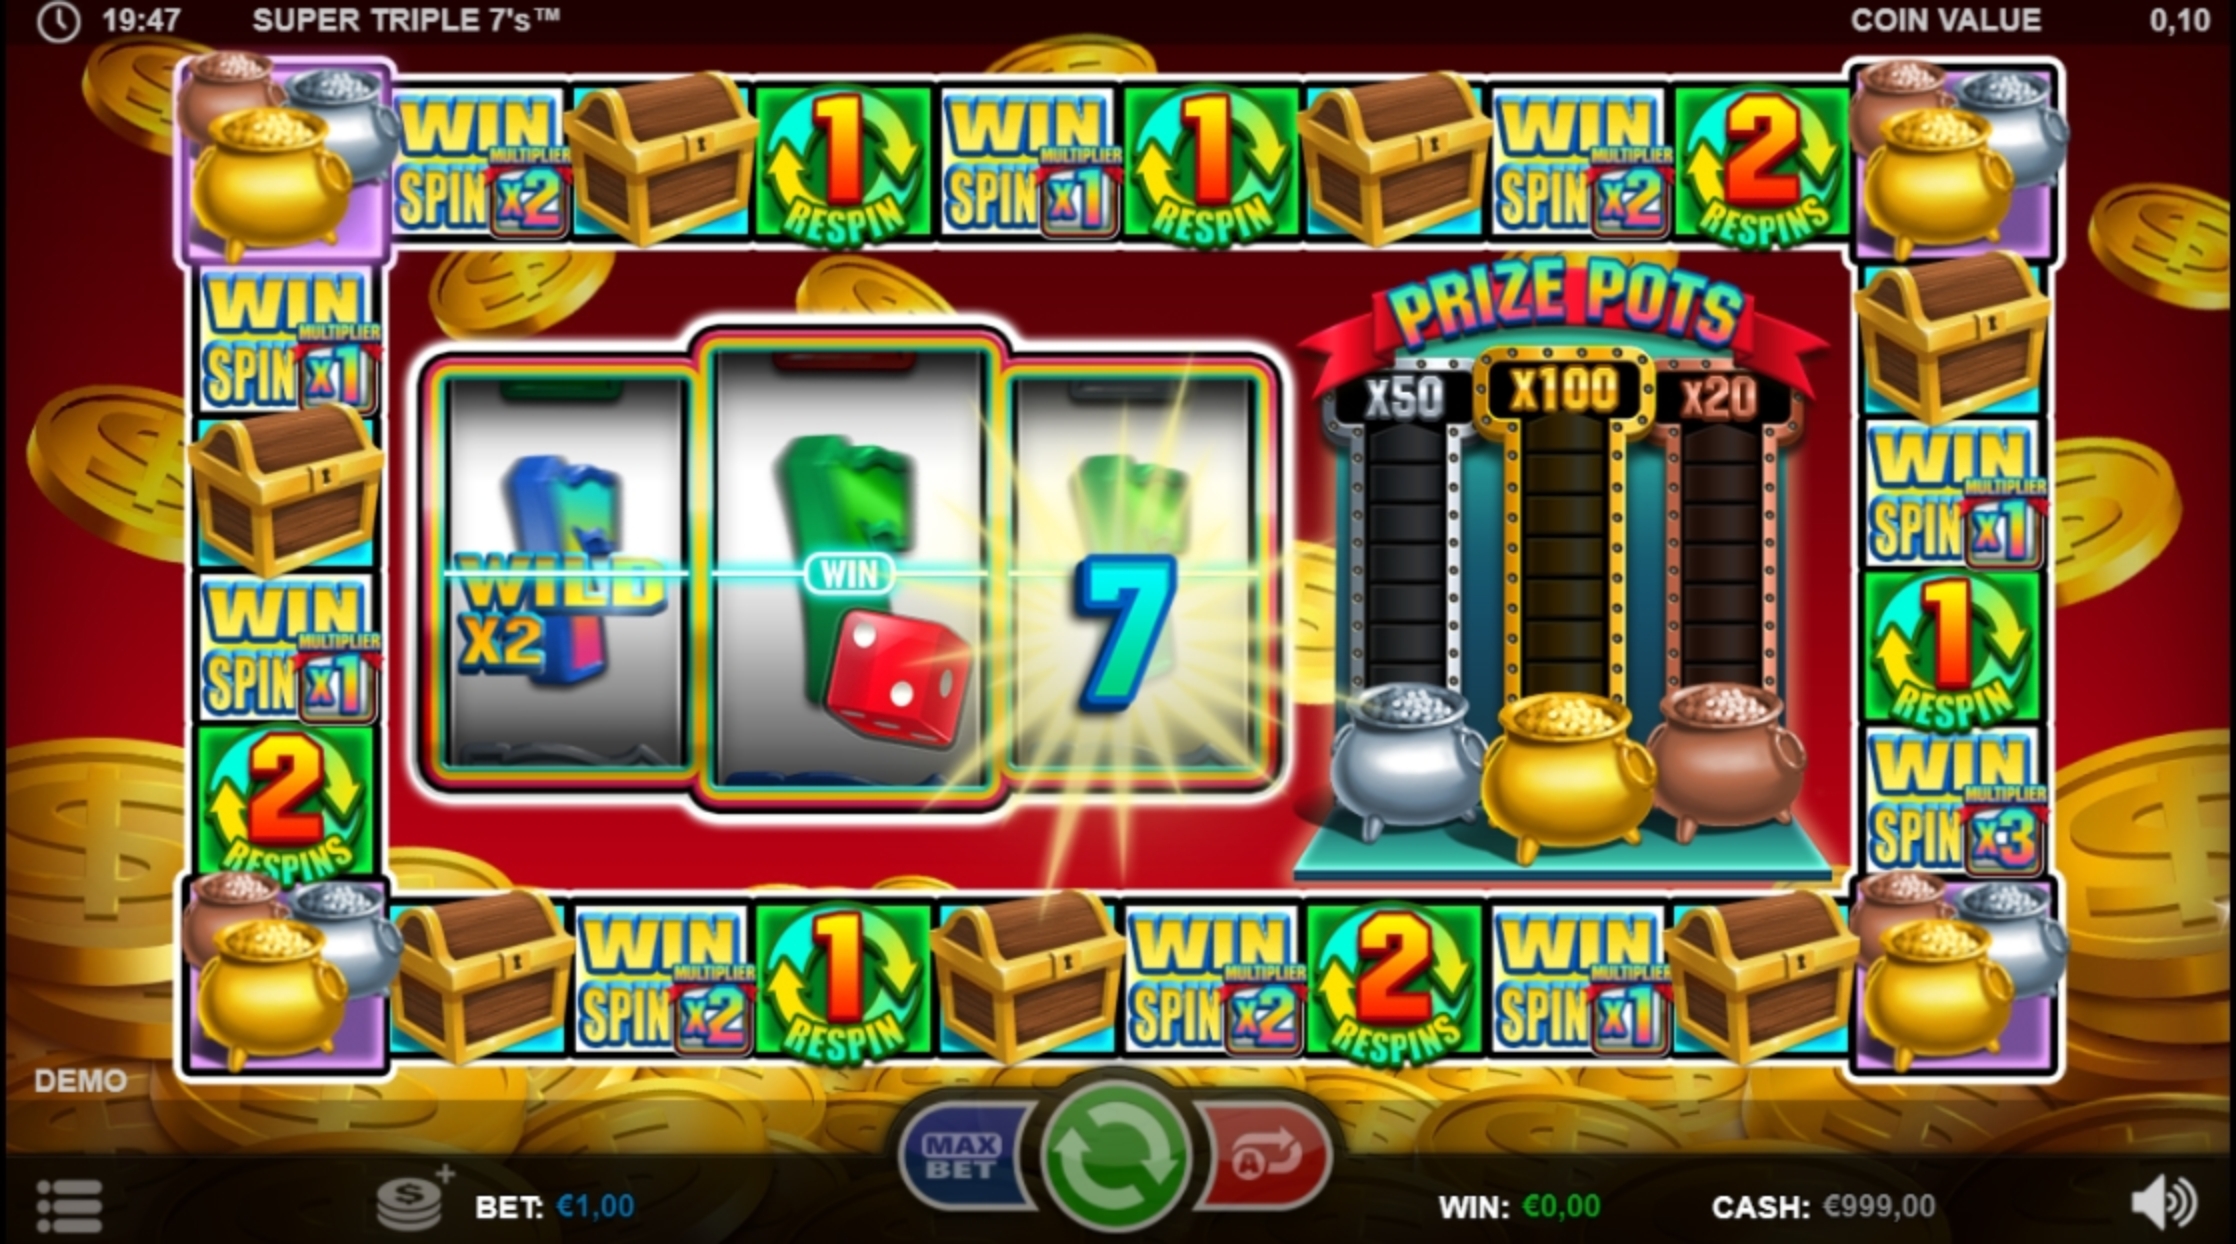 Win Money in Super Triple 7's Free Slot Game by Betsson Group